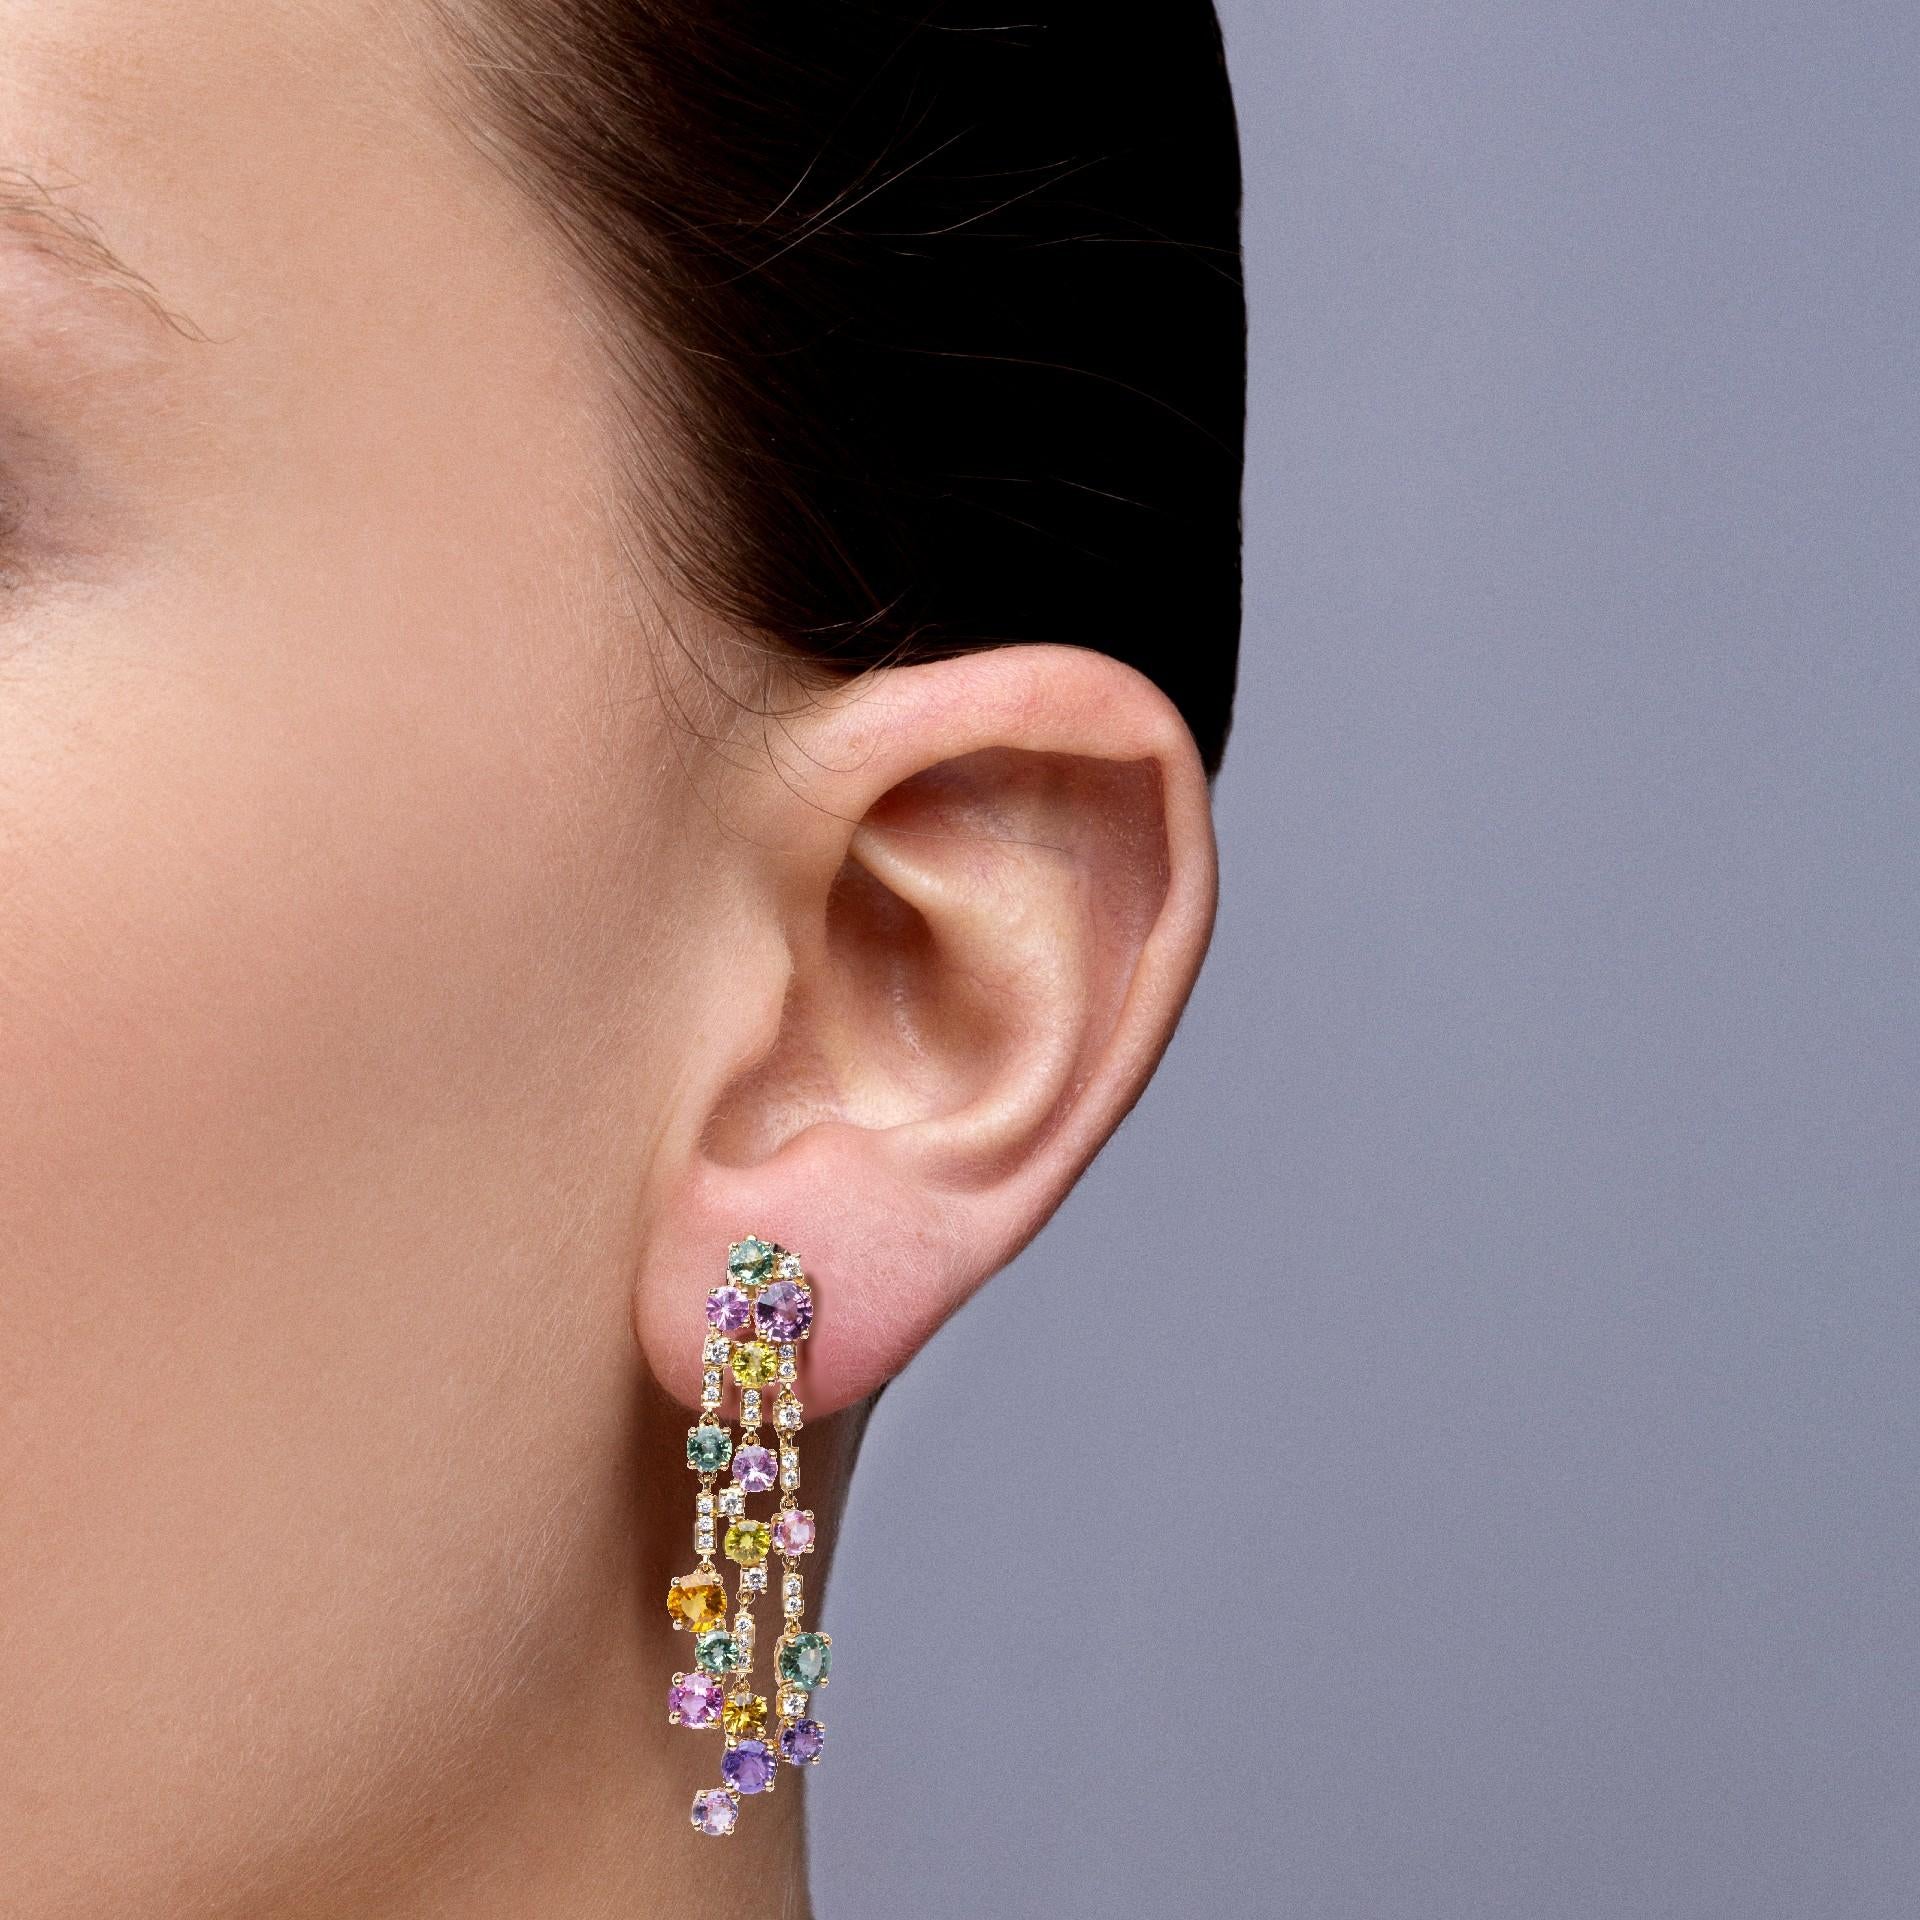 Alex Jona design collection, hand crafted in Italy, chandelier clip-on earrings featuring 7.57 carats of Multicolor sapphires, 5.34 carats of Amethysts and 0.37 carats of white diamonds.
Dimensions : L 2.12 in x W 0.59 in x D 0.14 in - L 2.12 mm x W